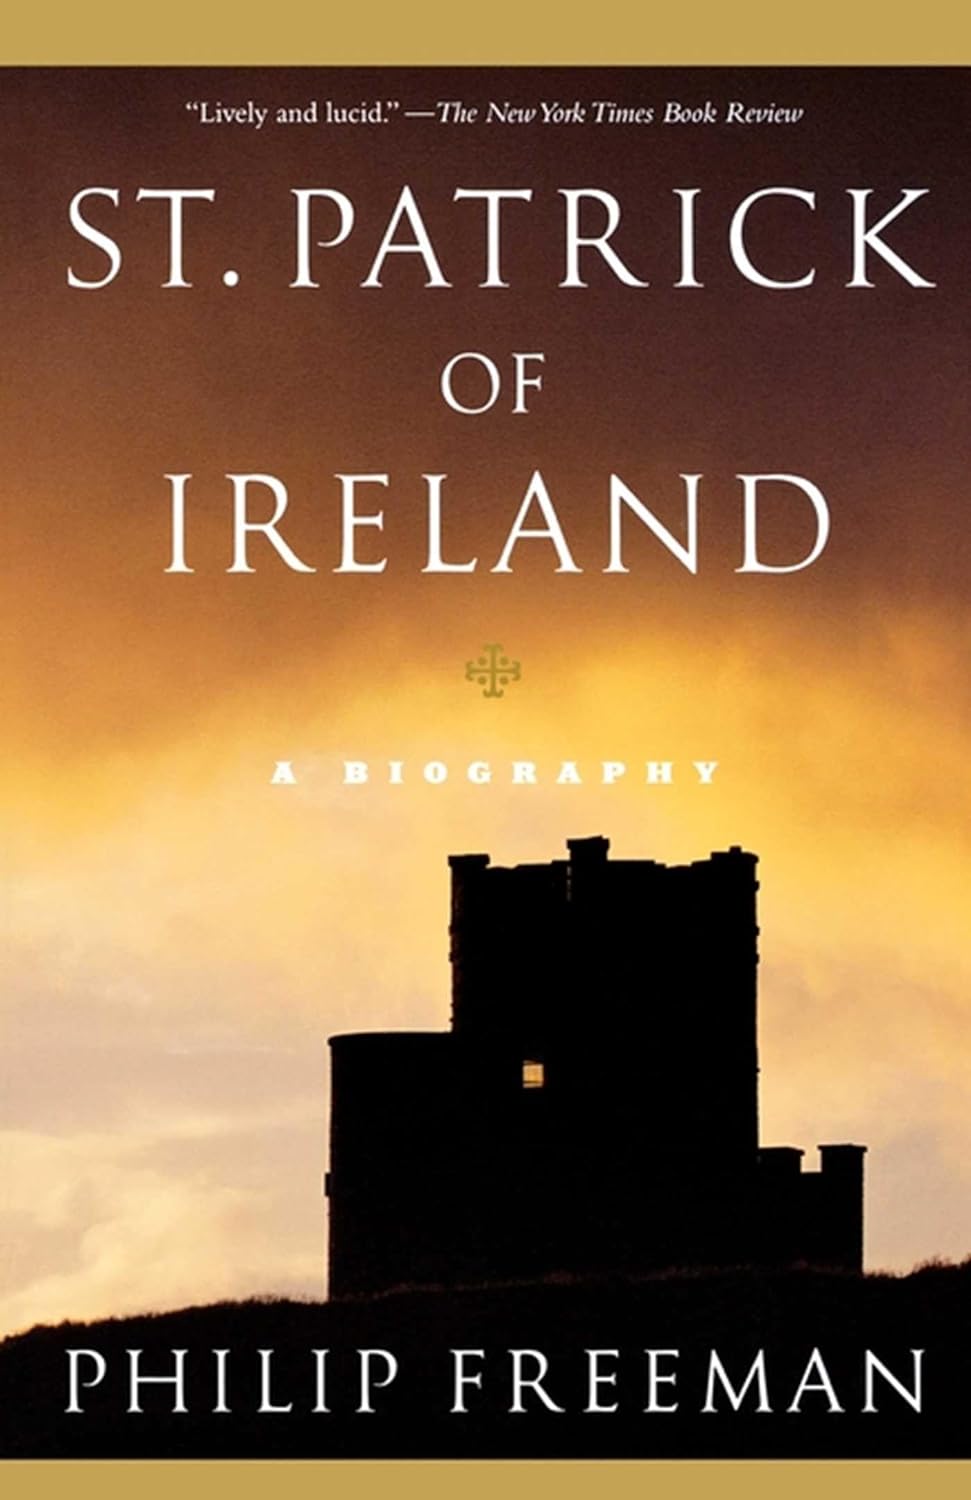 St. Patrick Of Ireland: A Biography By Philip Freeman